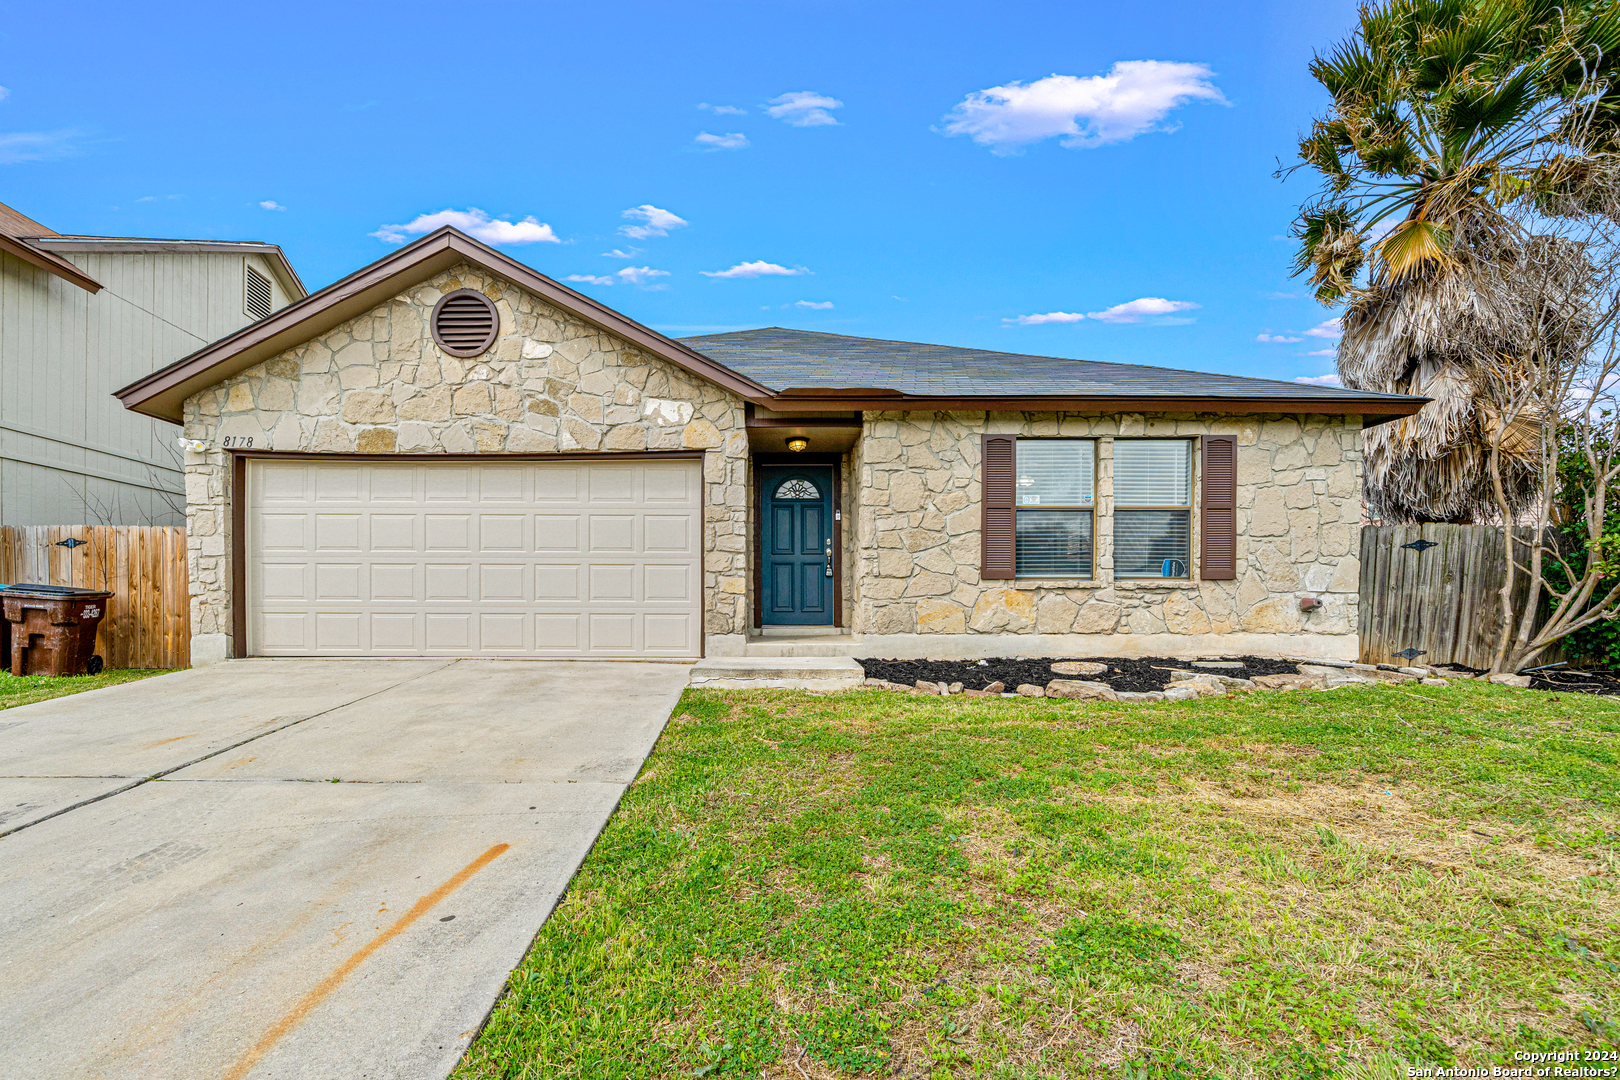 Photo of 8178 Bent Meadow Dr in Converse, TX